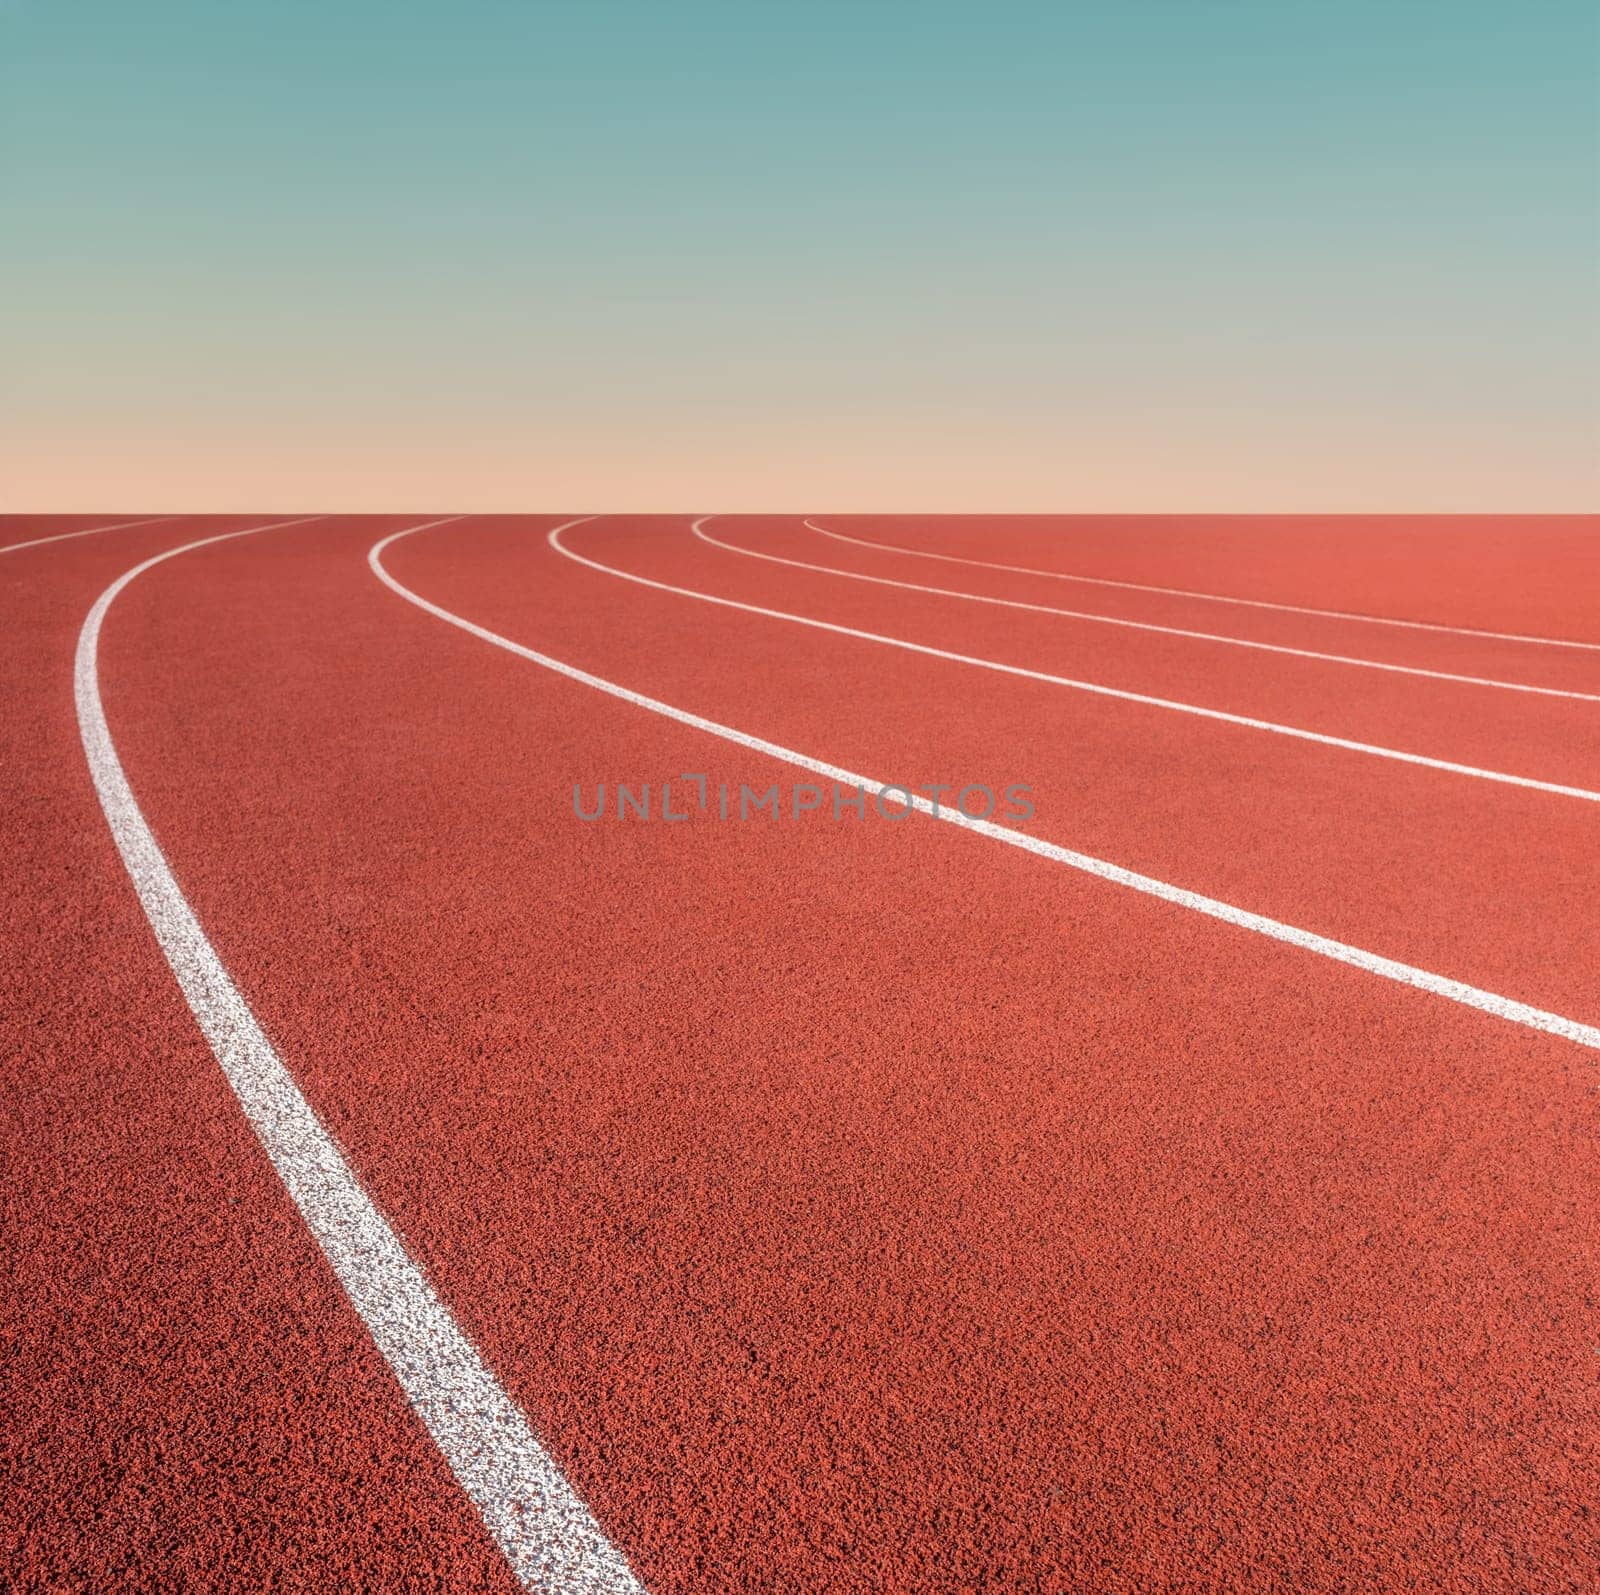 Conceptual Image Of Sports Ground Running Race White Markings And A Distant Sunset